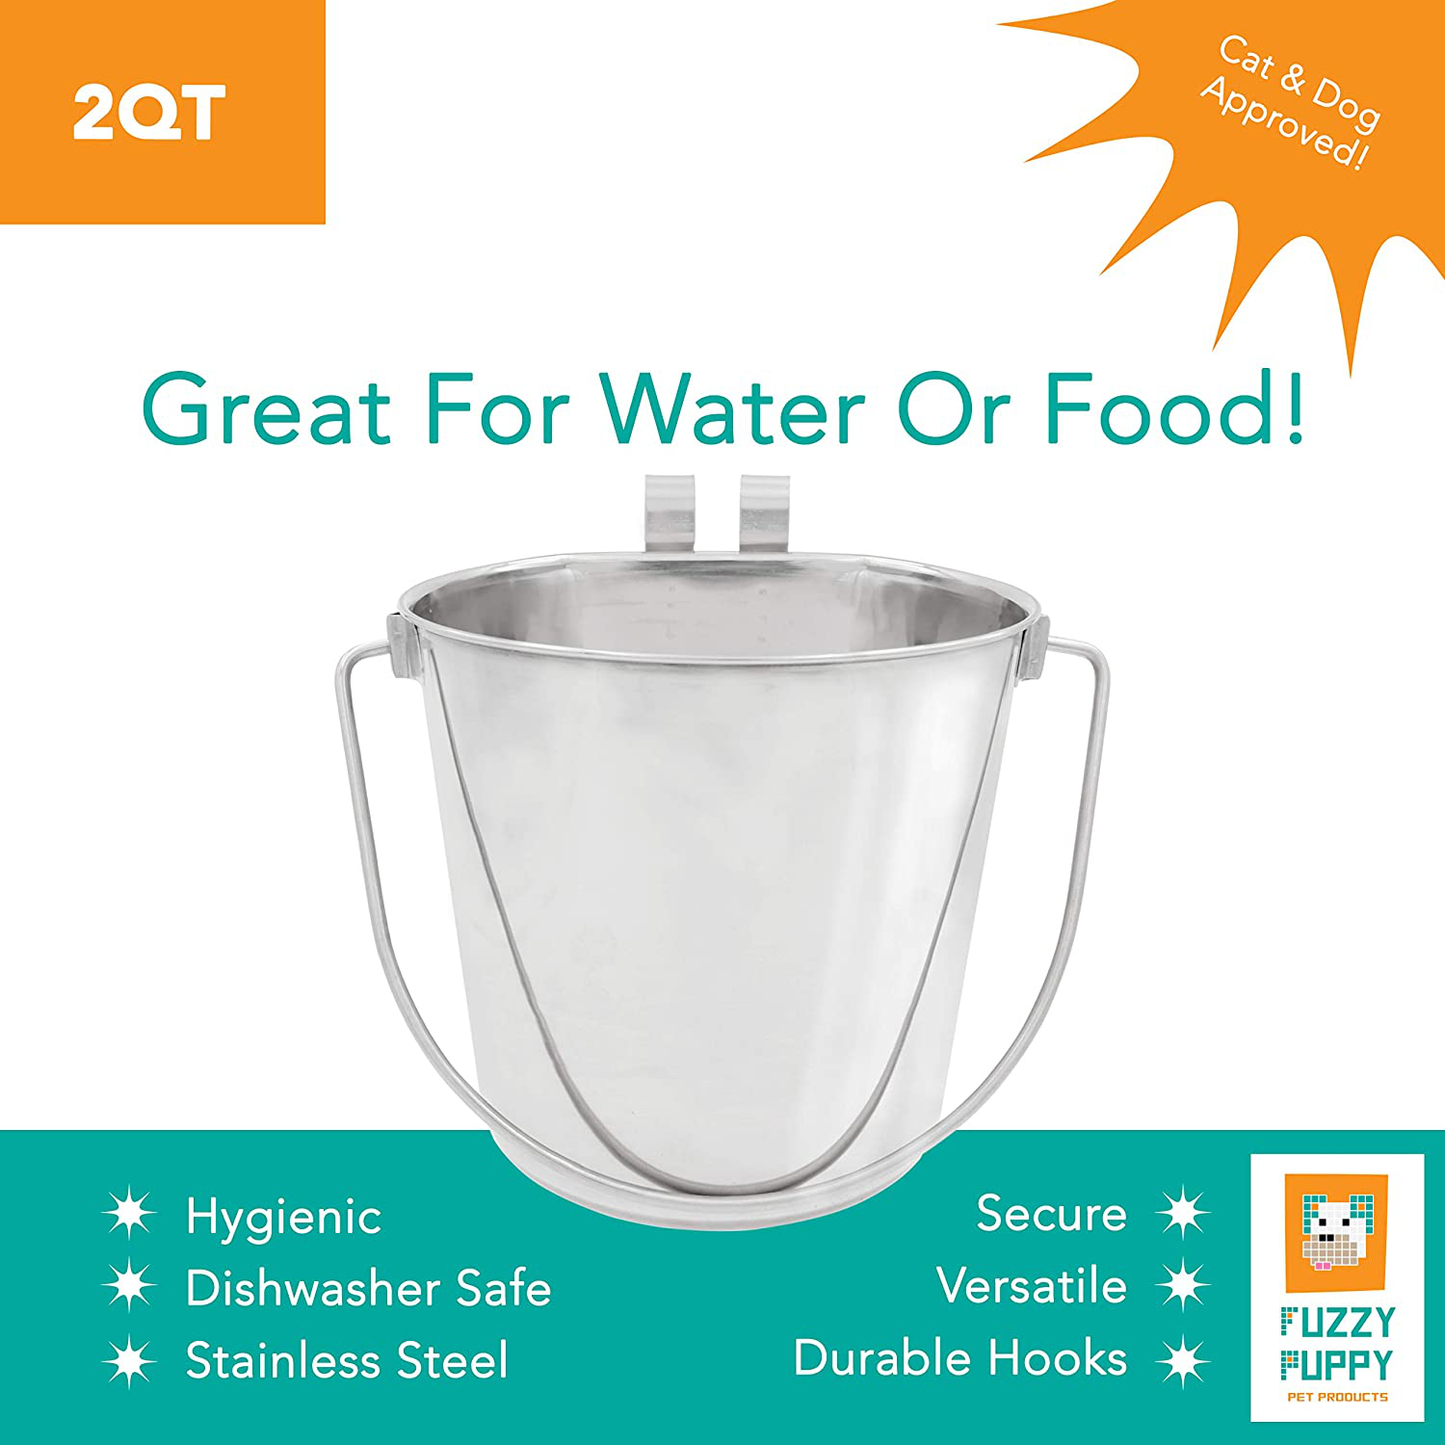 Fuzzy Puppy Flat Sided Pail with Dual Hooks, Snugly Fit on Dog, Cat and Critter Crates & Cages, Heavy Duty Stainless Steel